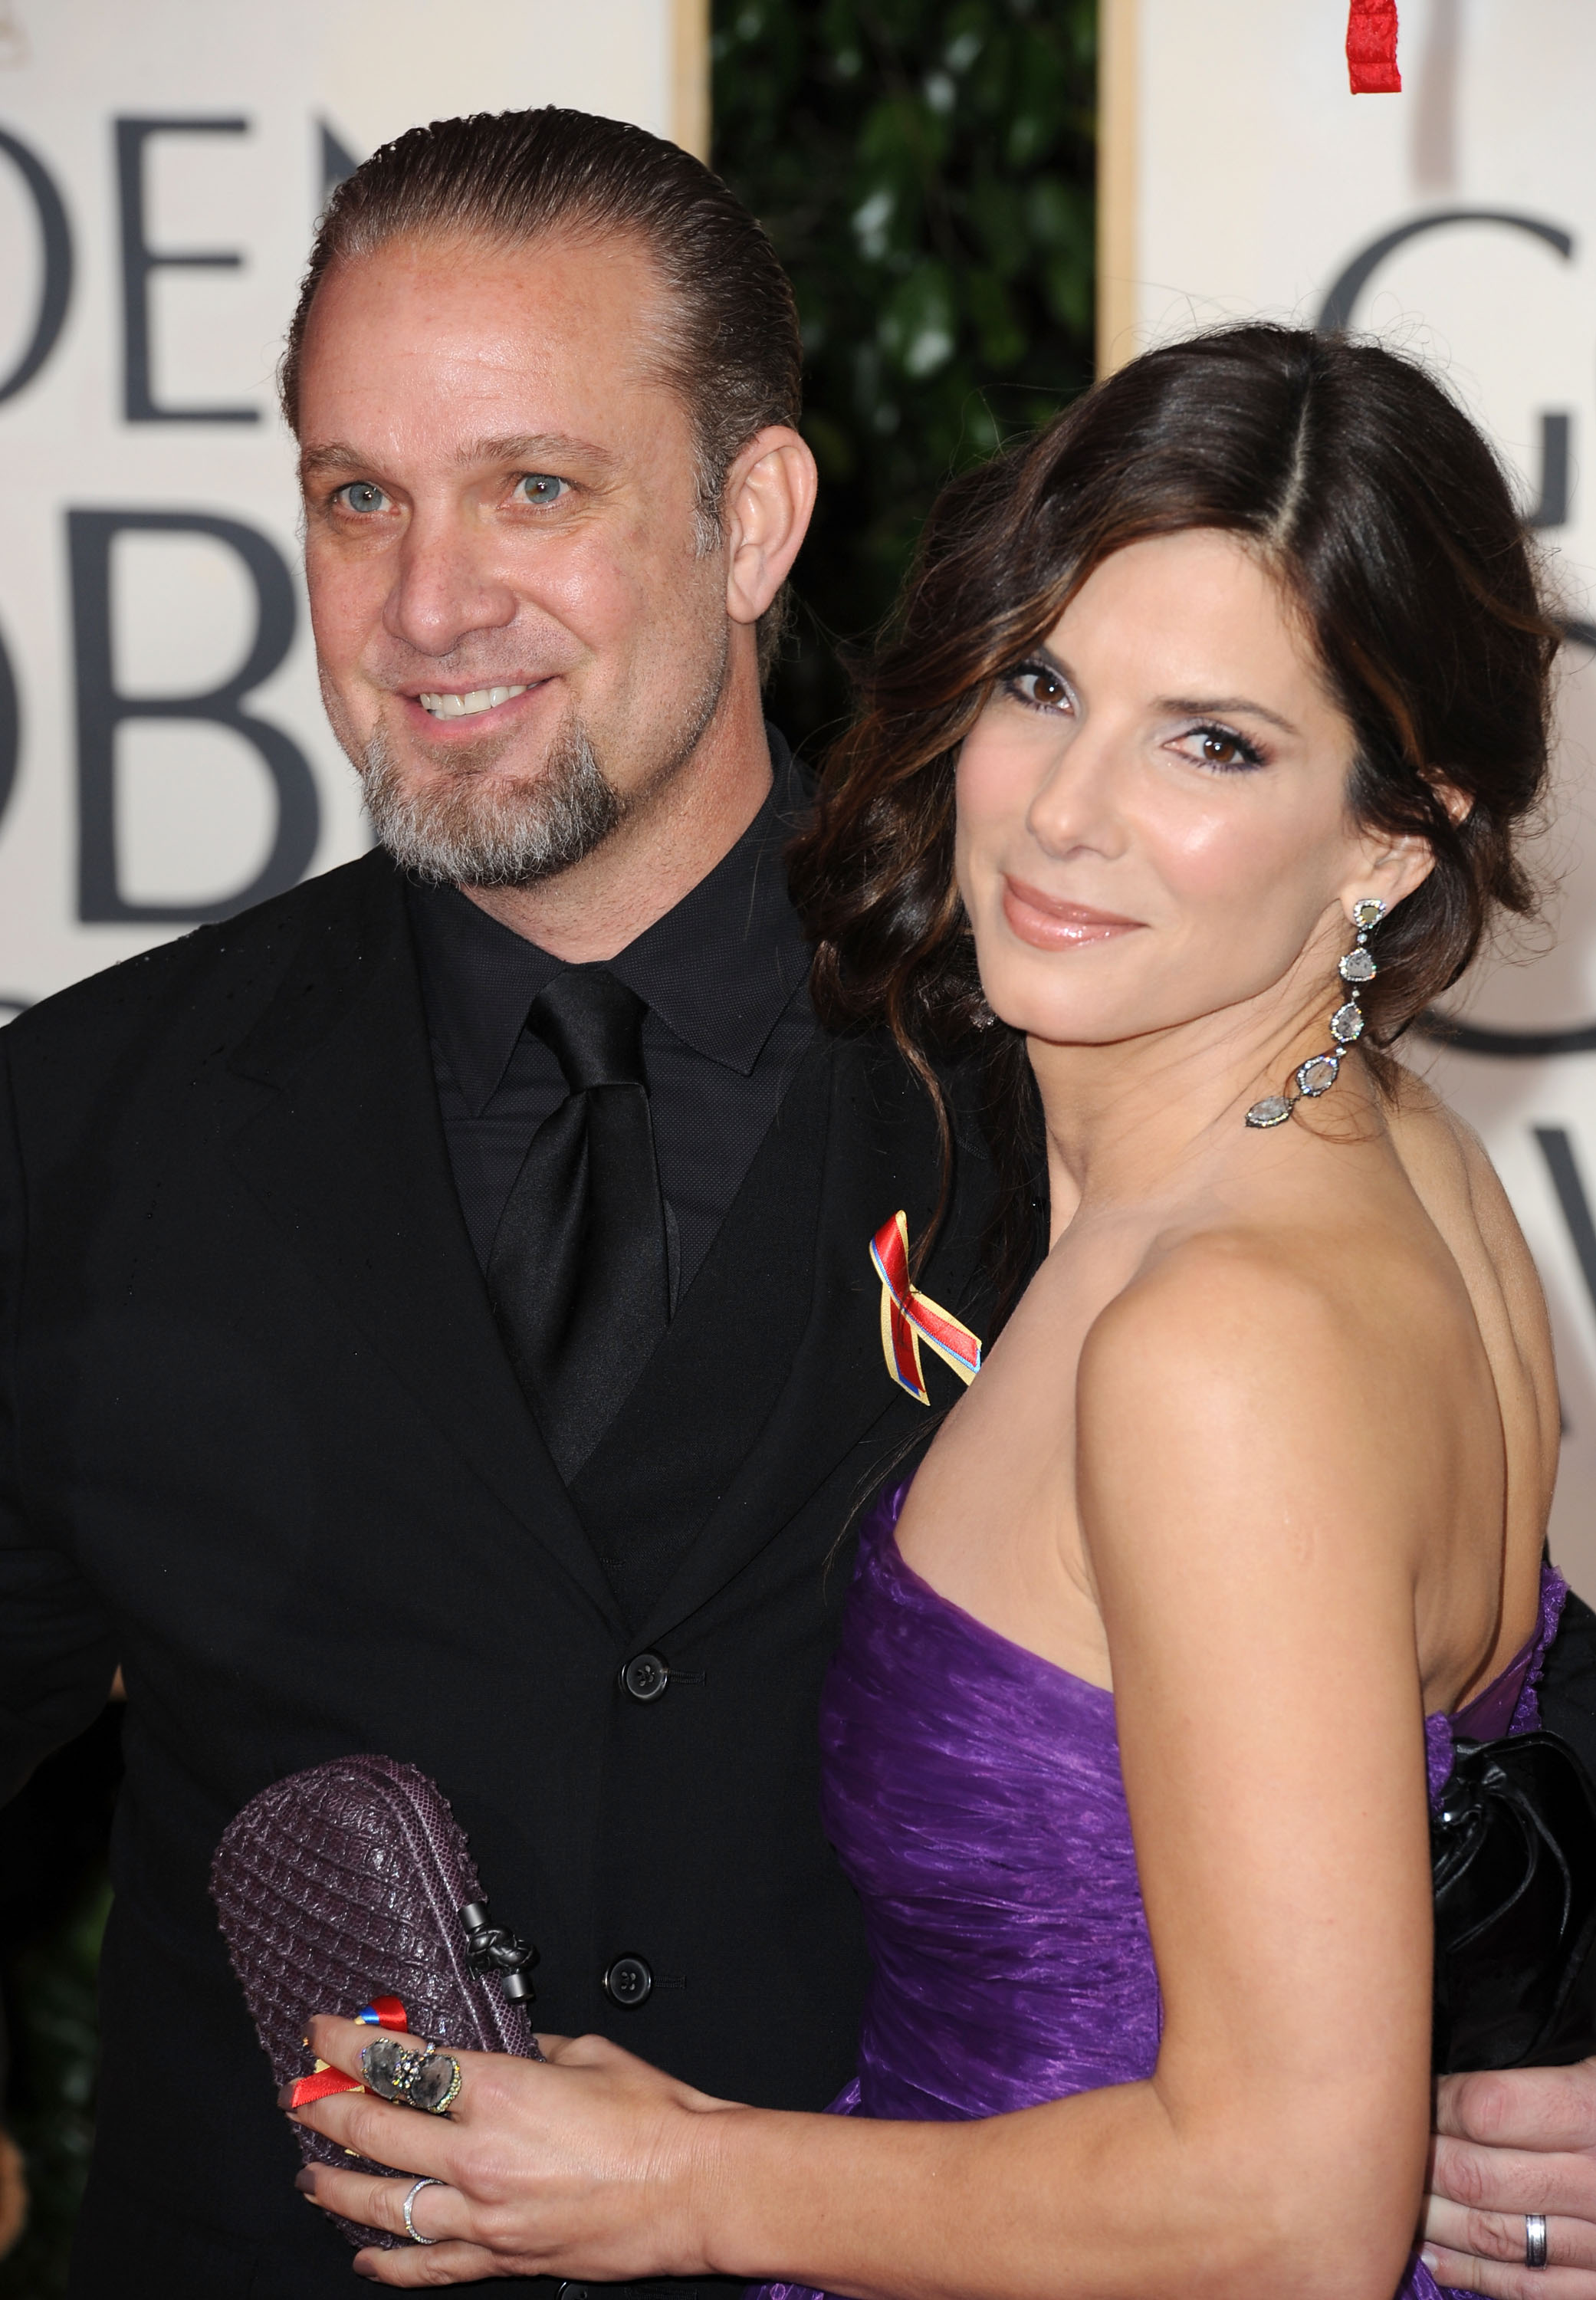 Jesse James and Sandra Bullock at The Beverly Hilton Hotel on January 17, 2010, in Beverly Hills, California. | Source: Getty Images